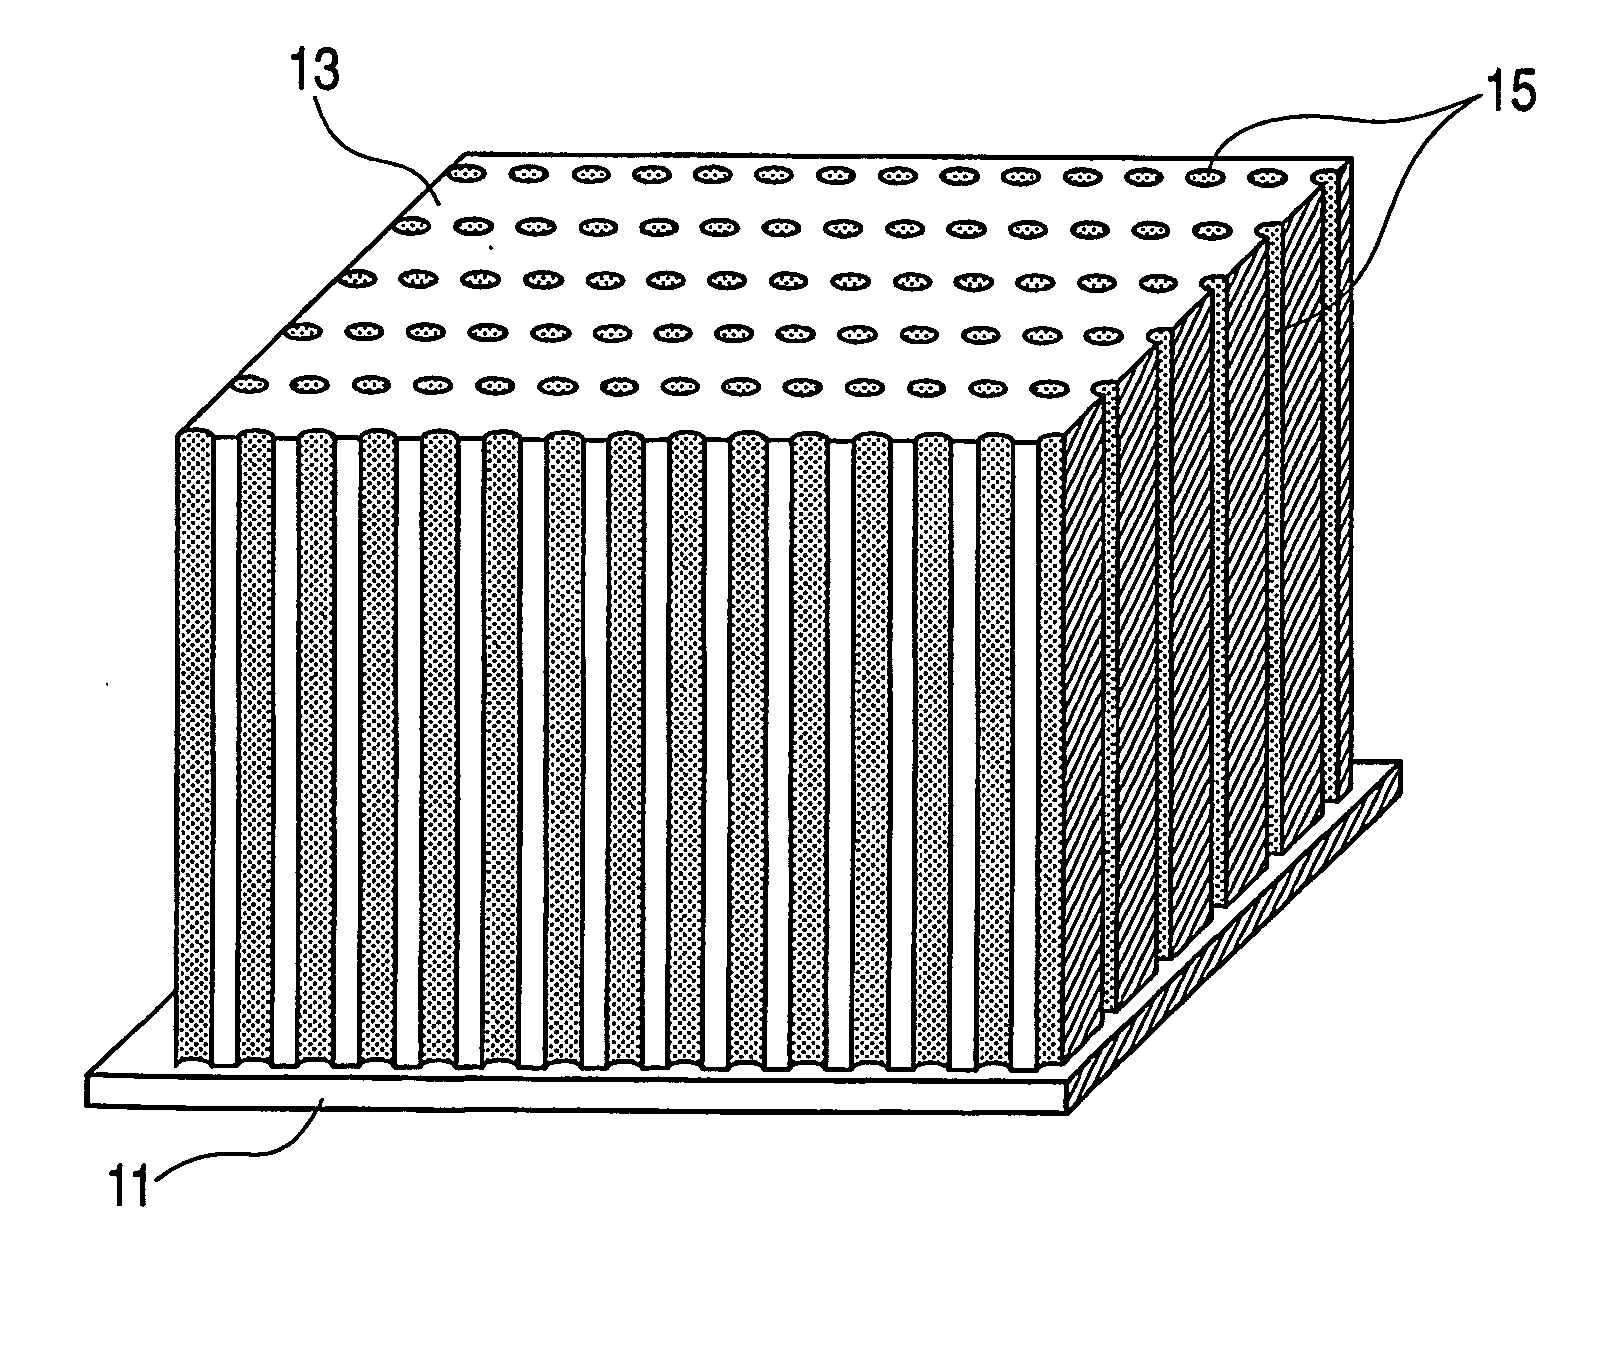 Columnar structured material, electrode having columnar structured material, and production method therefor